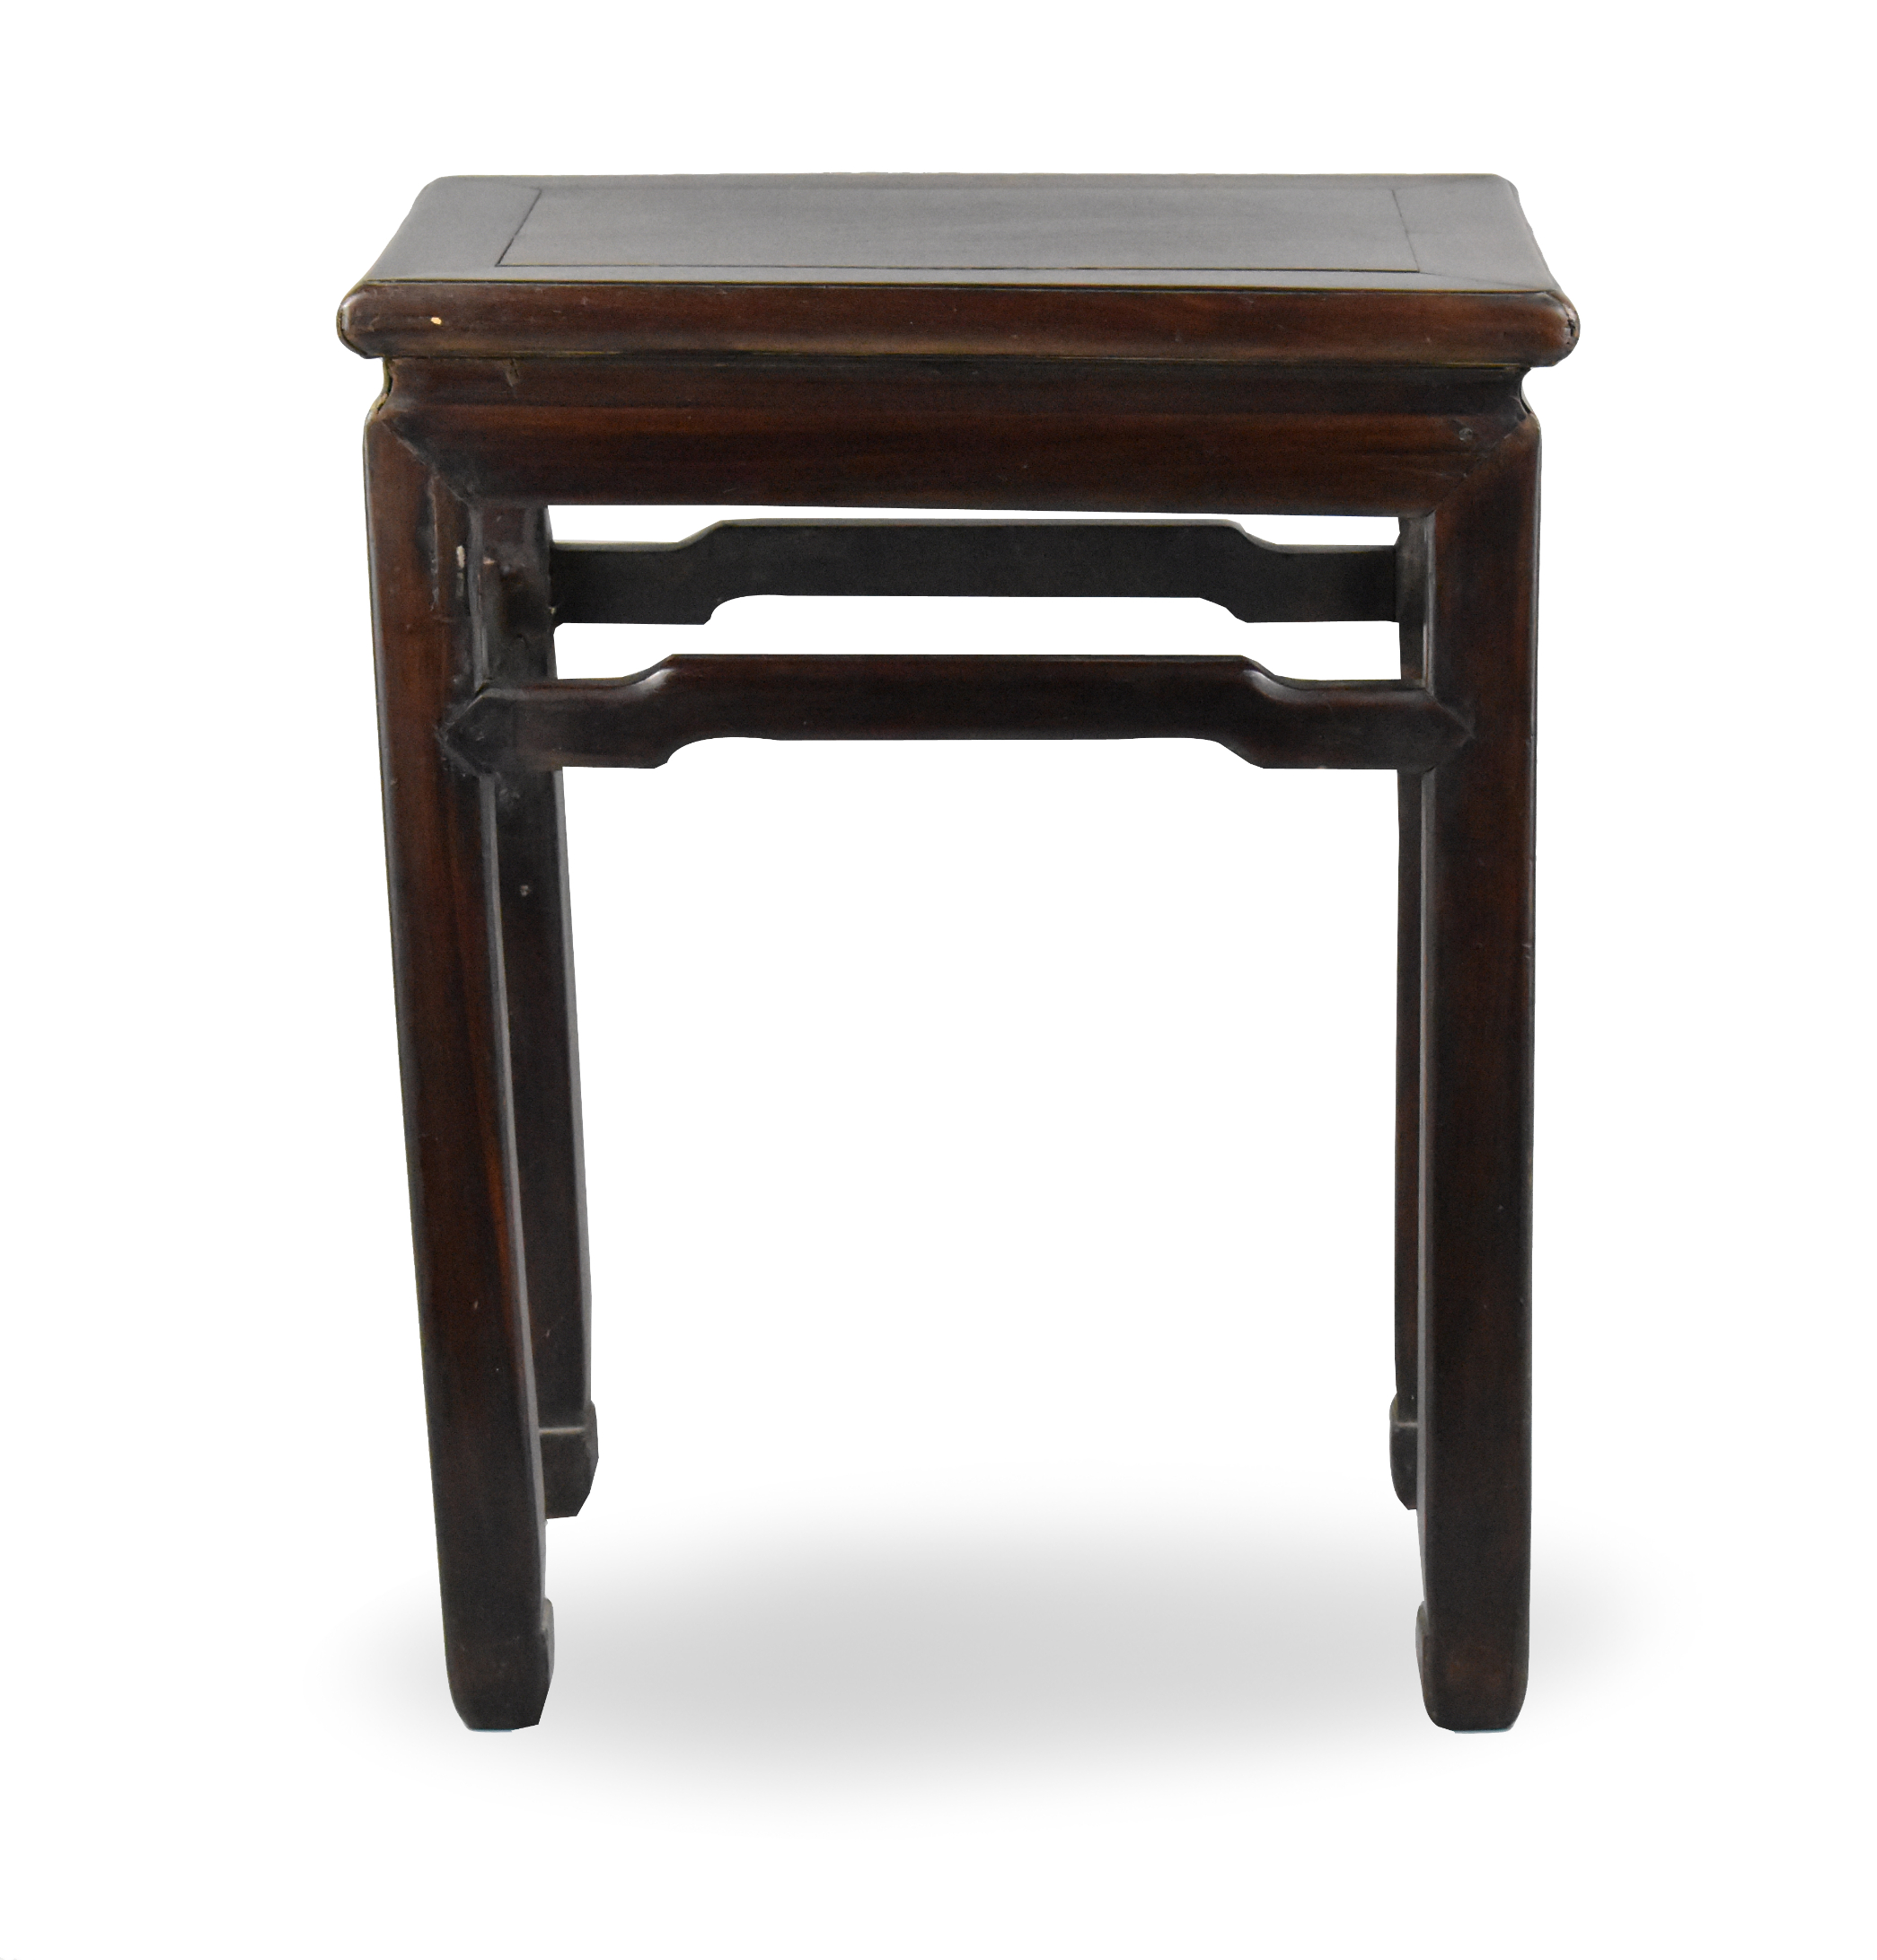 SMALL CHINESE HARDWOOD TABLE,QING